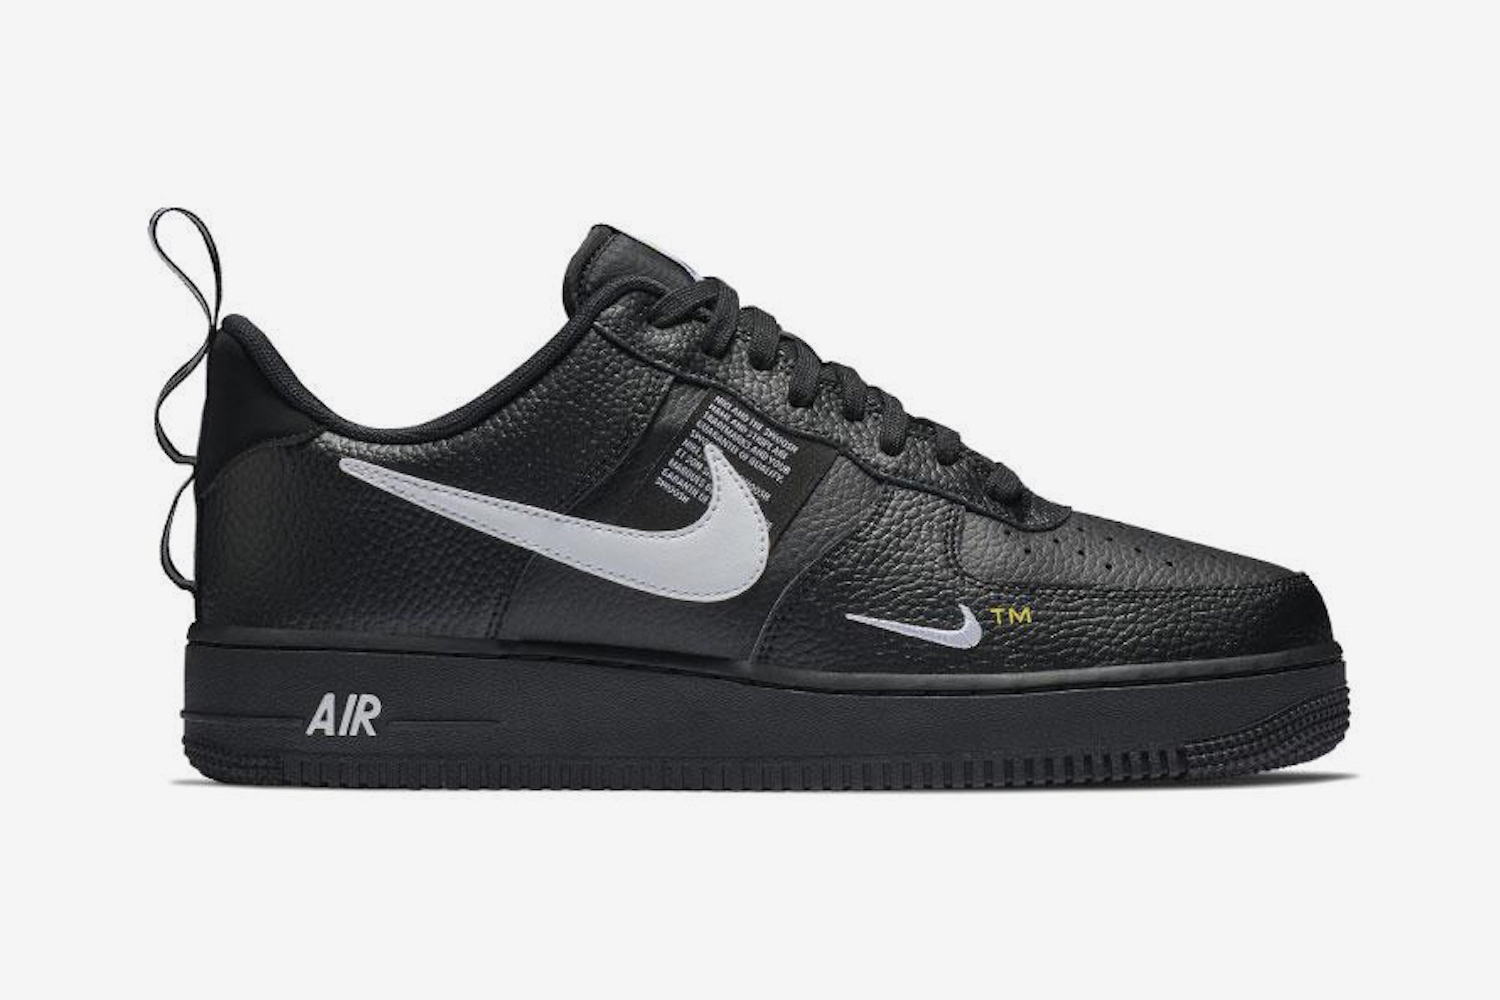 Nike Air Force 1 LV8 Utility Buy Now